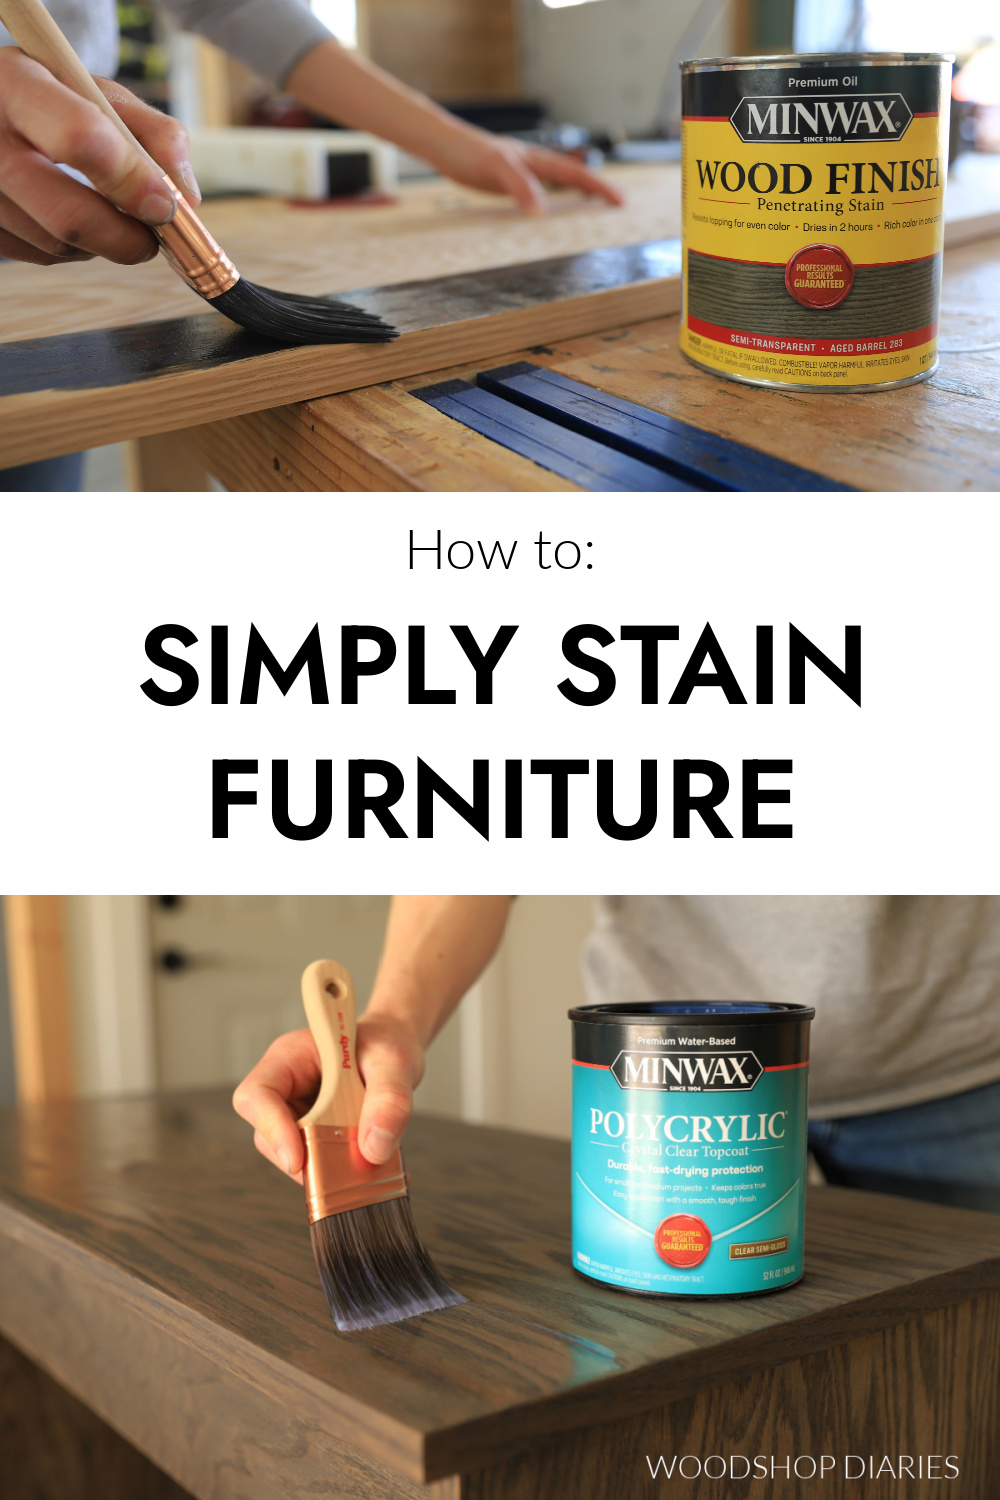 Pinterest collage showing close up of staining plywood on top and applying clear coat to plywood on bottom with text "how to simply stain furniture"